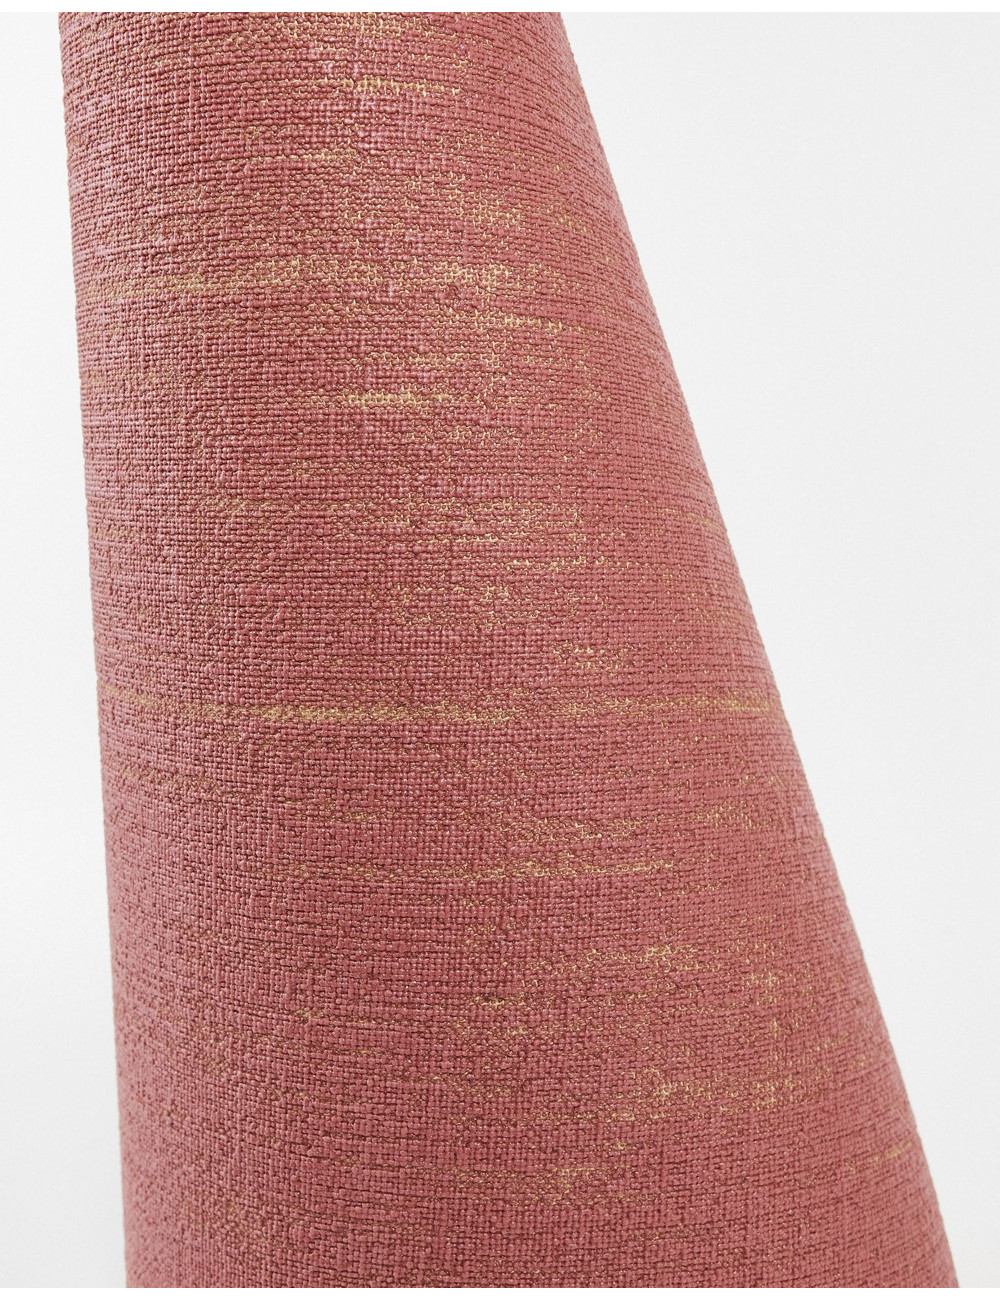 HIIT flax yoga mat in coral